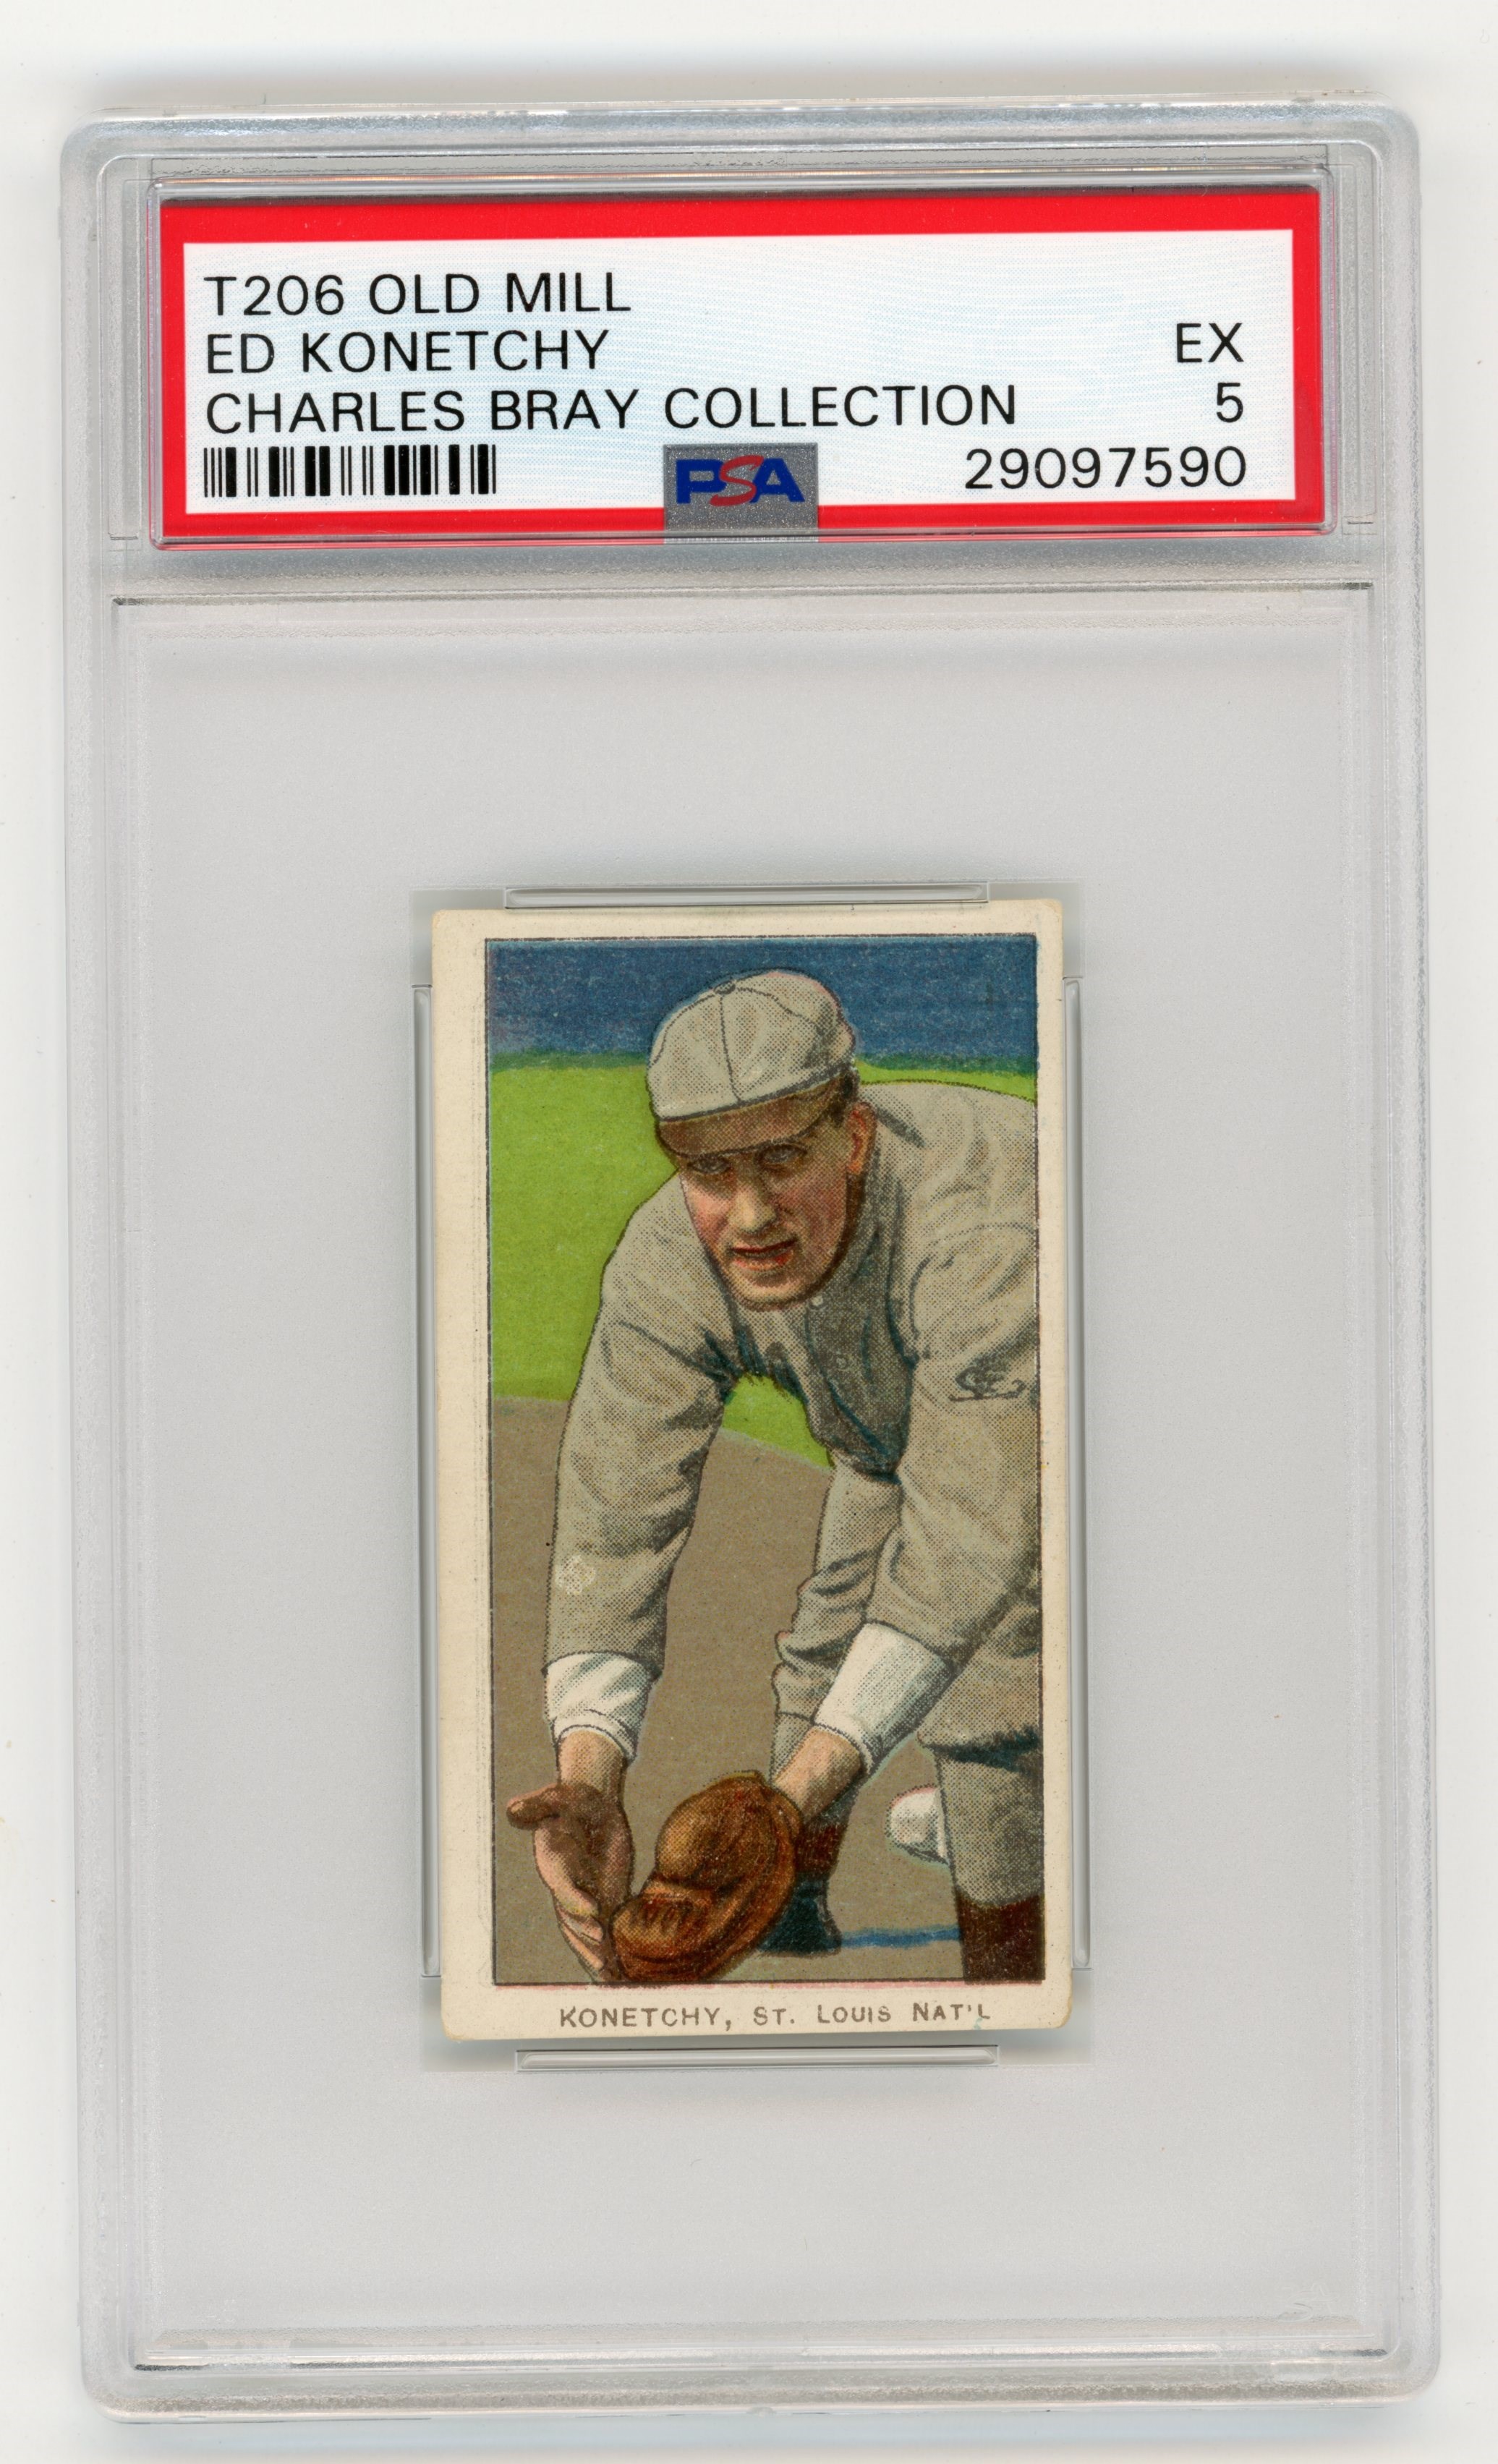 Baseball and Trading Cards - T206 Old Mill Ed Konetchy PSA EX 5 From The Charles Bray Collection